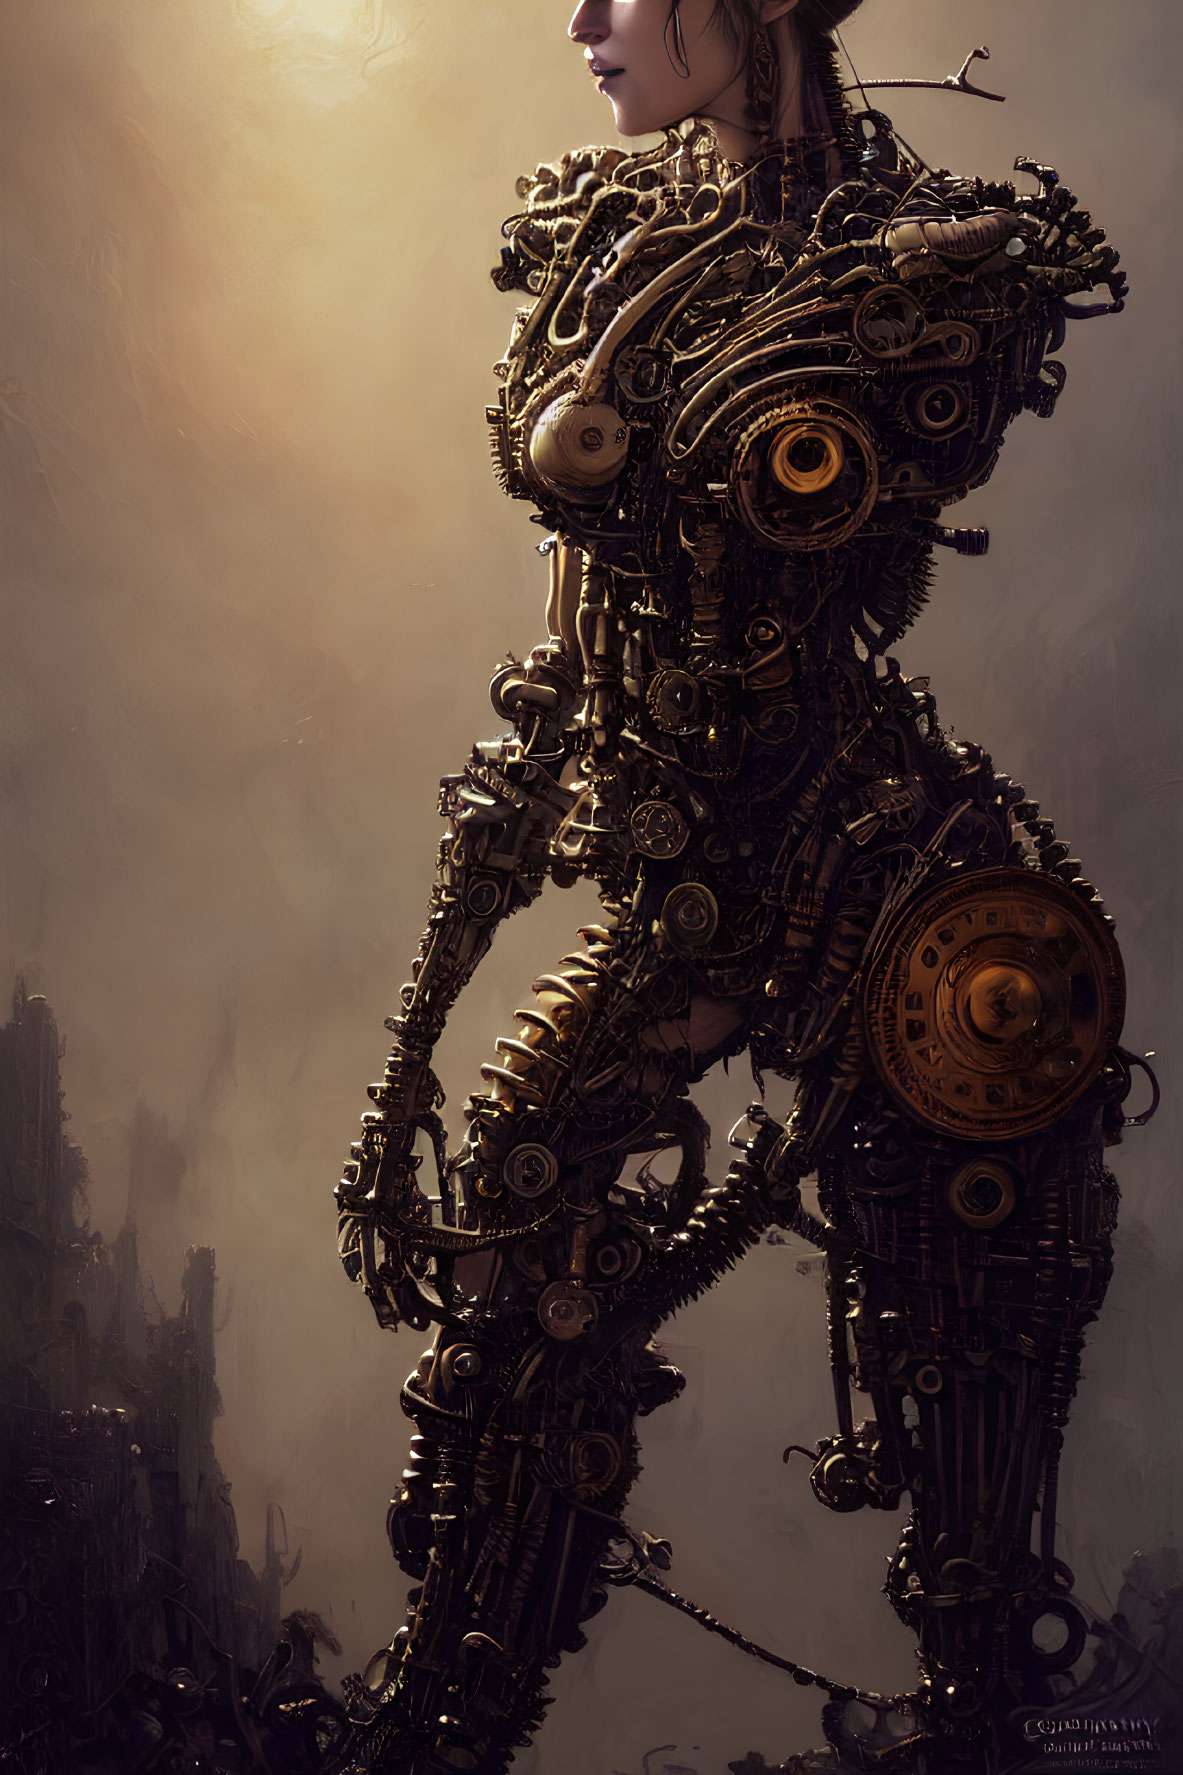 Intricate digital artwork of female form with mechanical parts against amber-lit backdrop